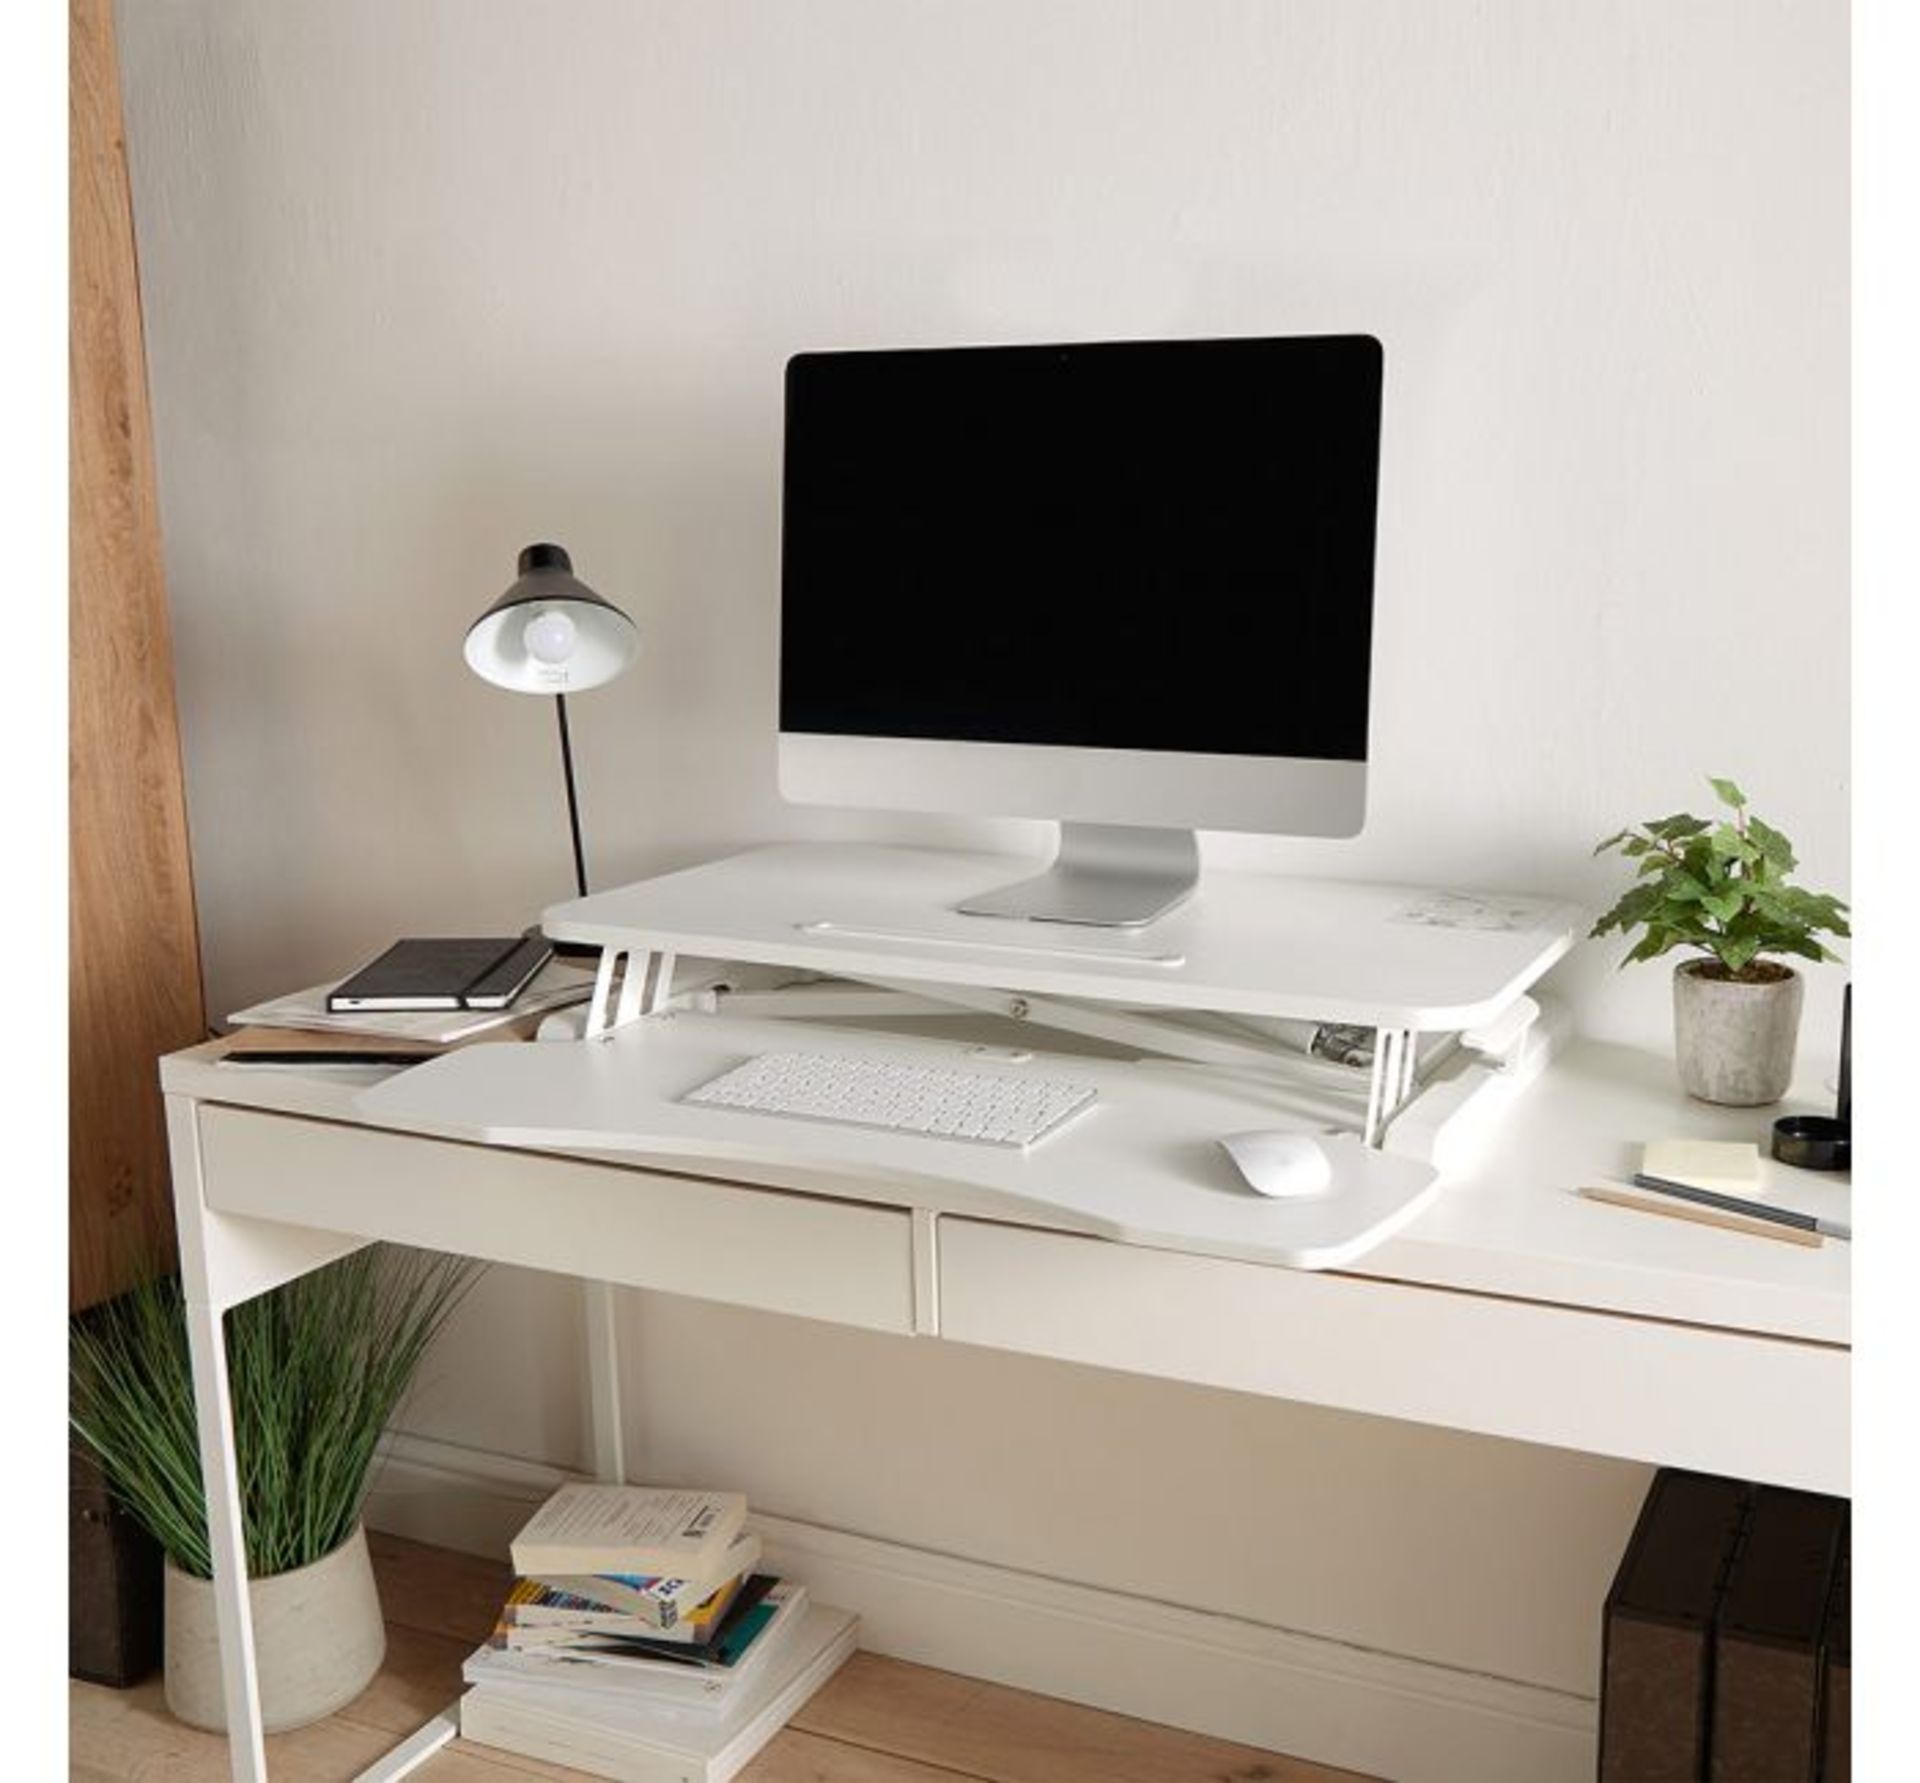 (HZ83) Sit/Stand Rising Workstation – White Sits securely atop your desk with quick change b... - Image 3 of 4